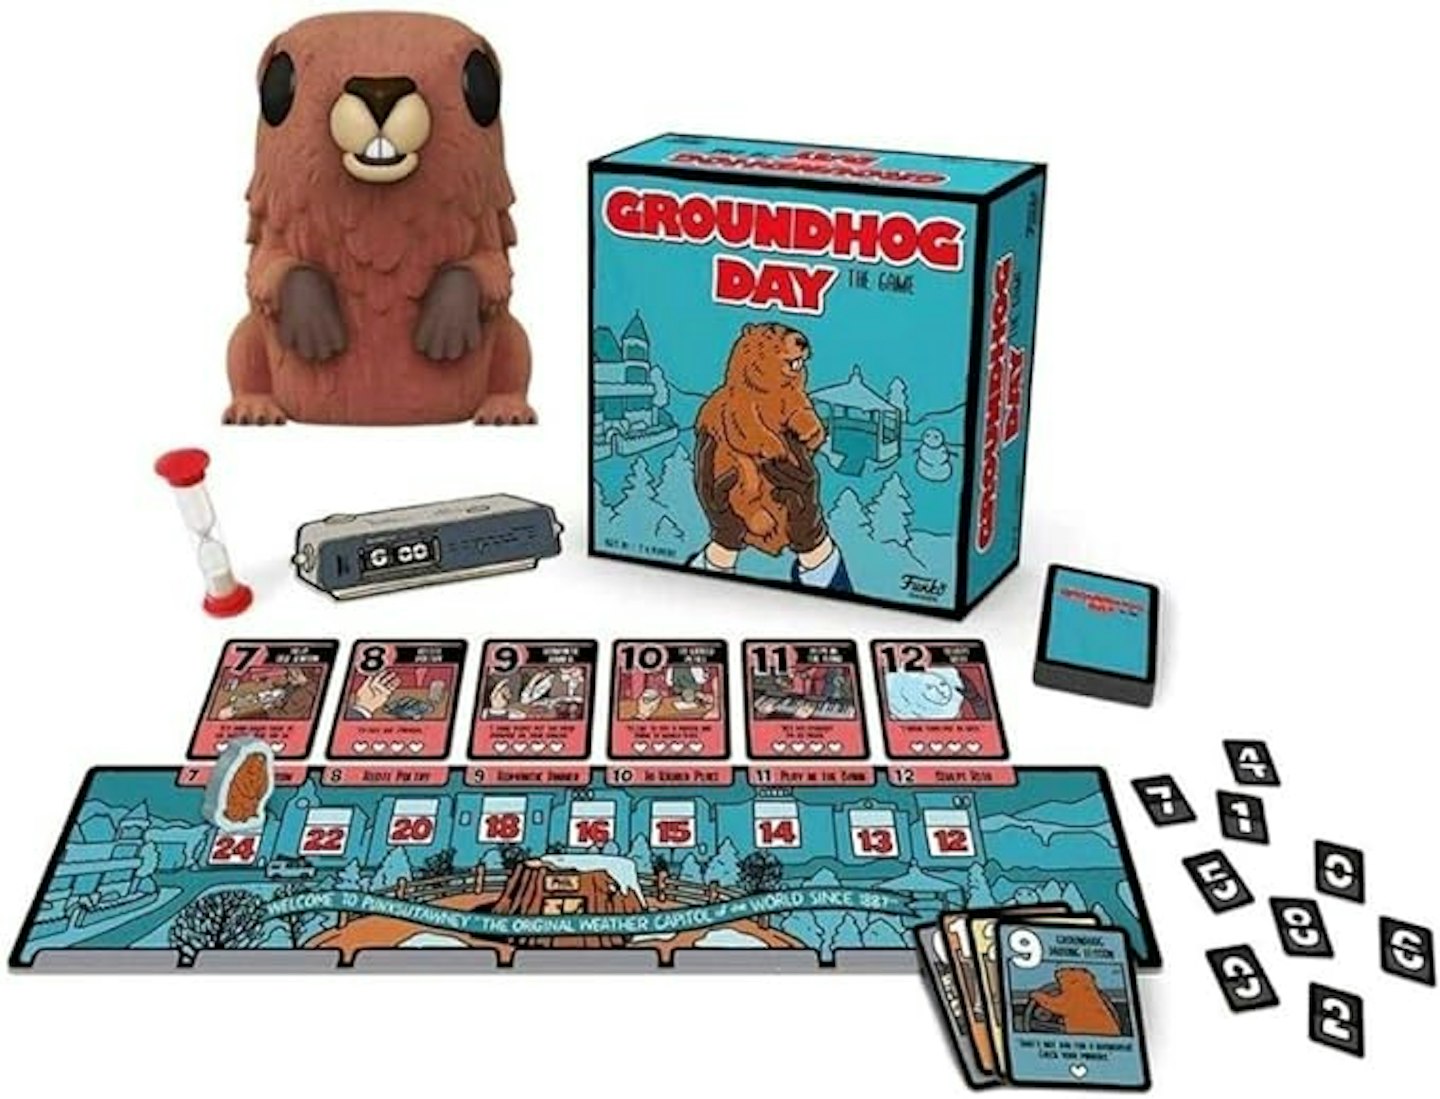 Groundhog Day board game box and contents